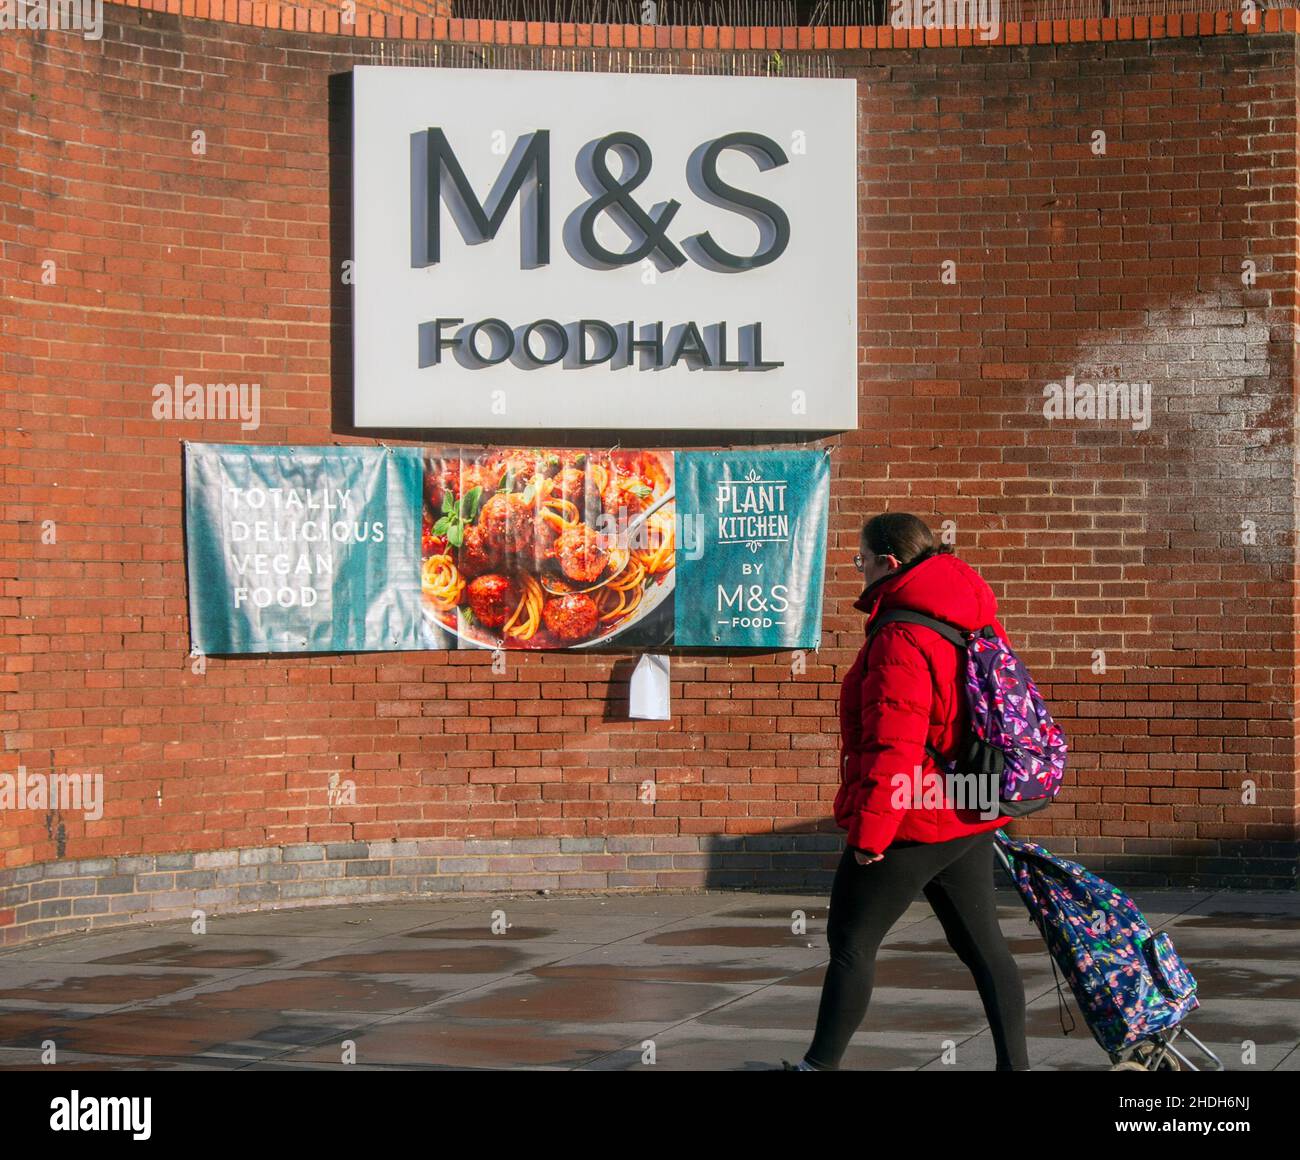 M&S Marks and Spencer Food Hall banner sign advertising vegan foods in Southport, UK Stock Photo